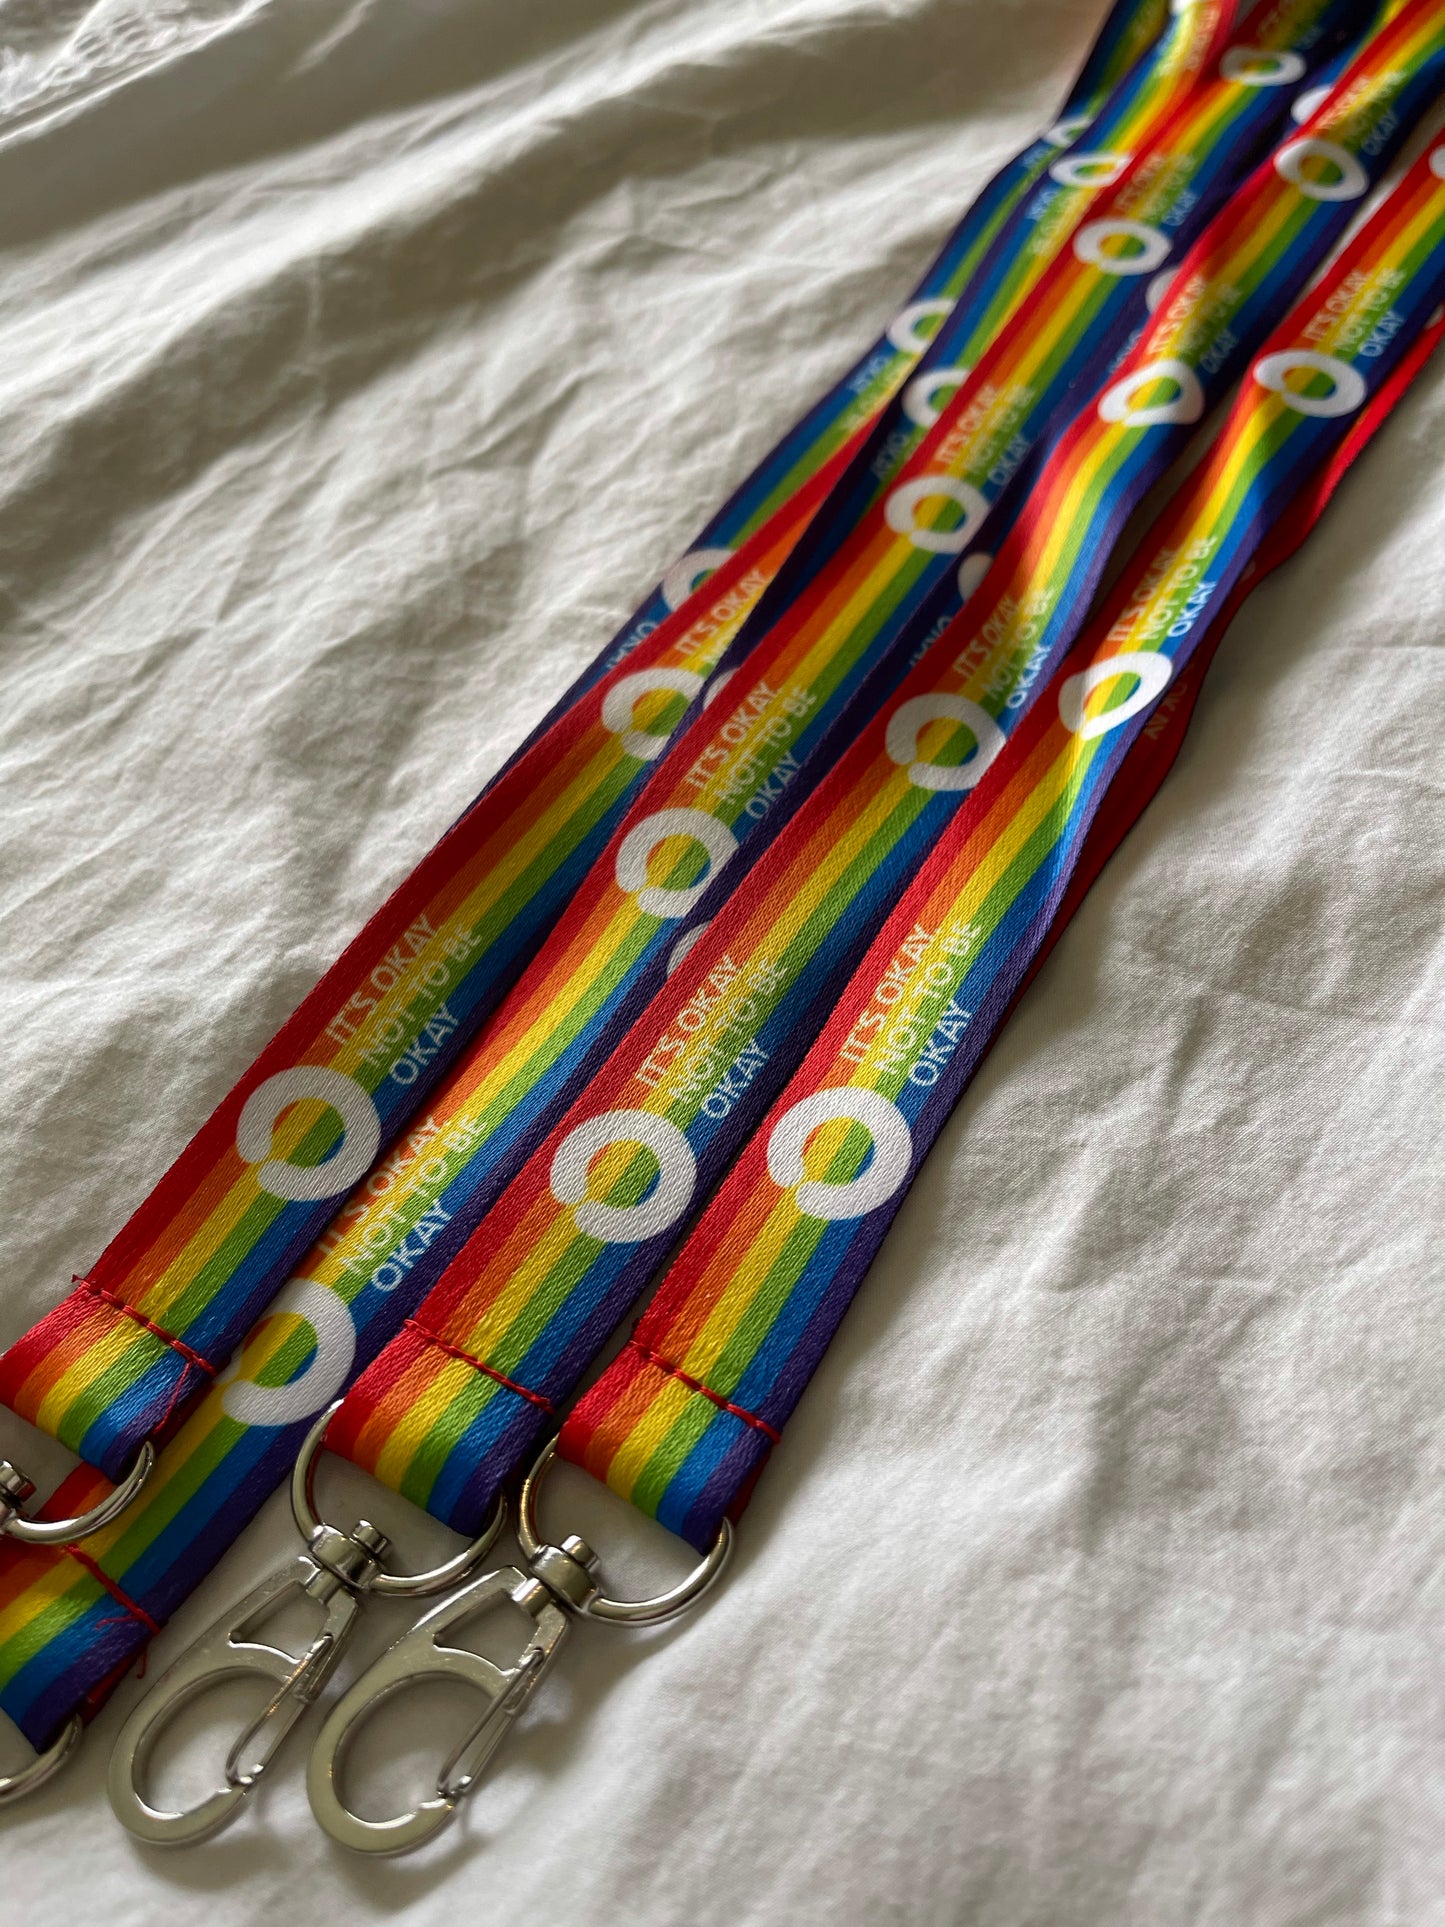 Rainbow Lanyard with Safety Clip